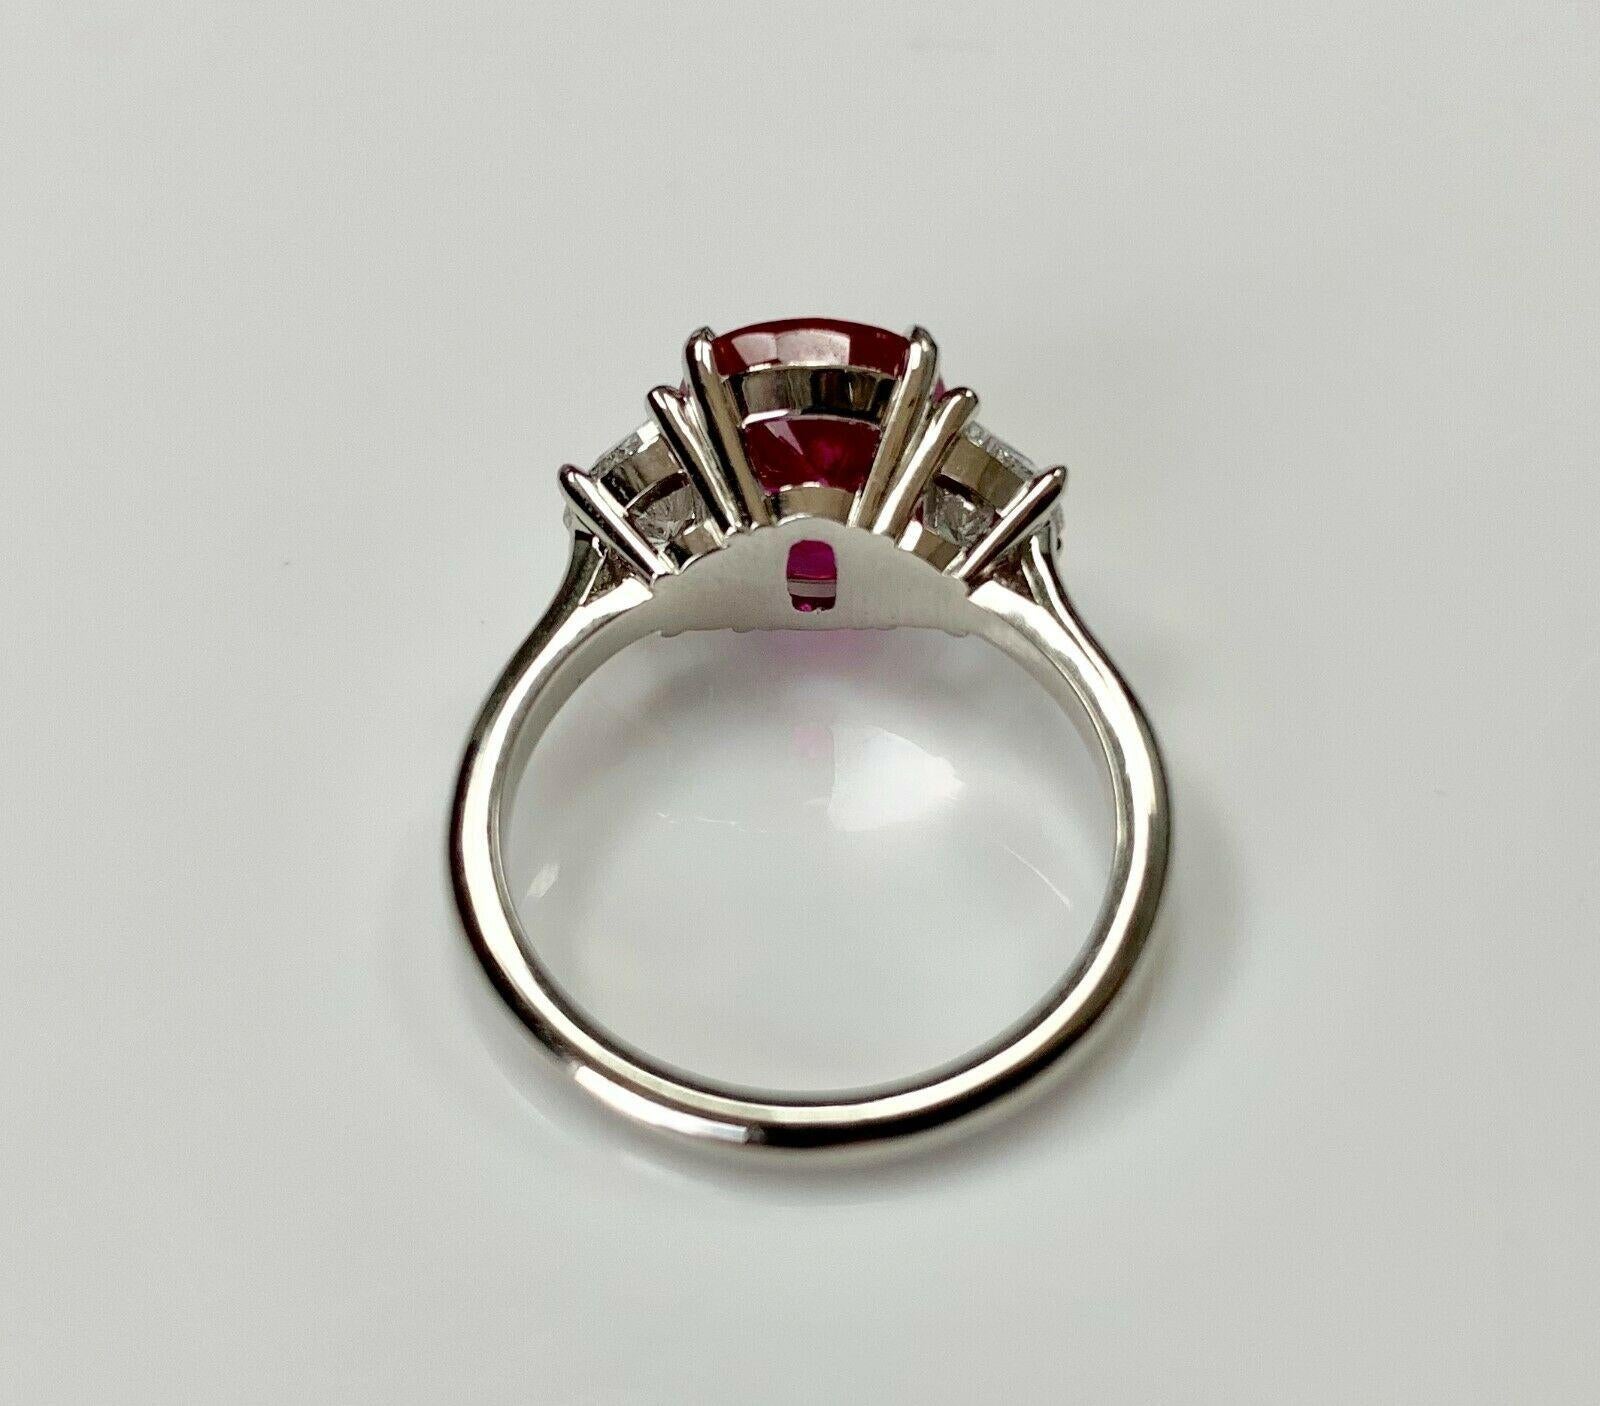 Burma ‘No Heat’ Ruby 5.53 Carat and Diamond Cocktail Ring Gubelin Certified For Sale 1